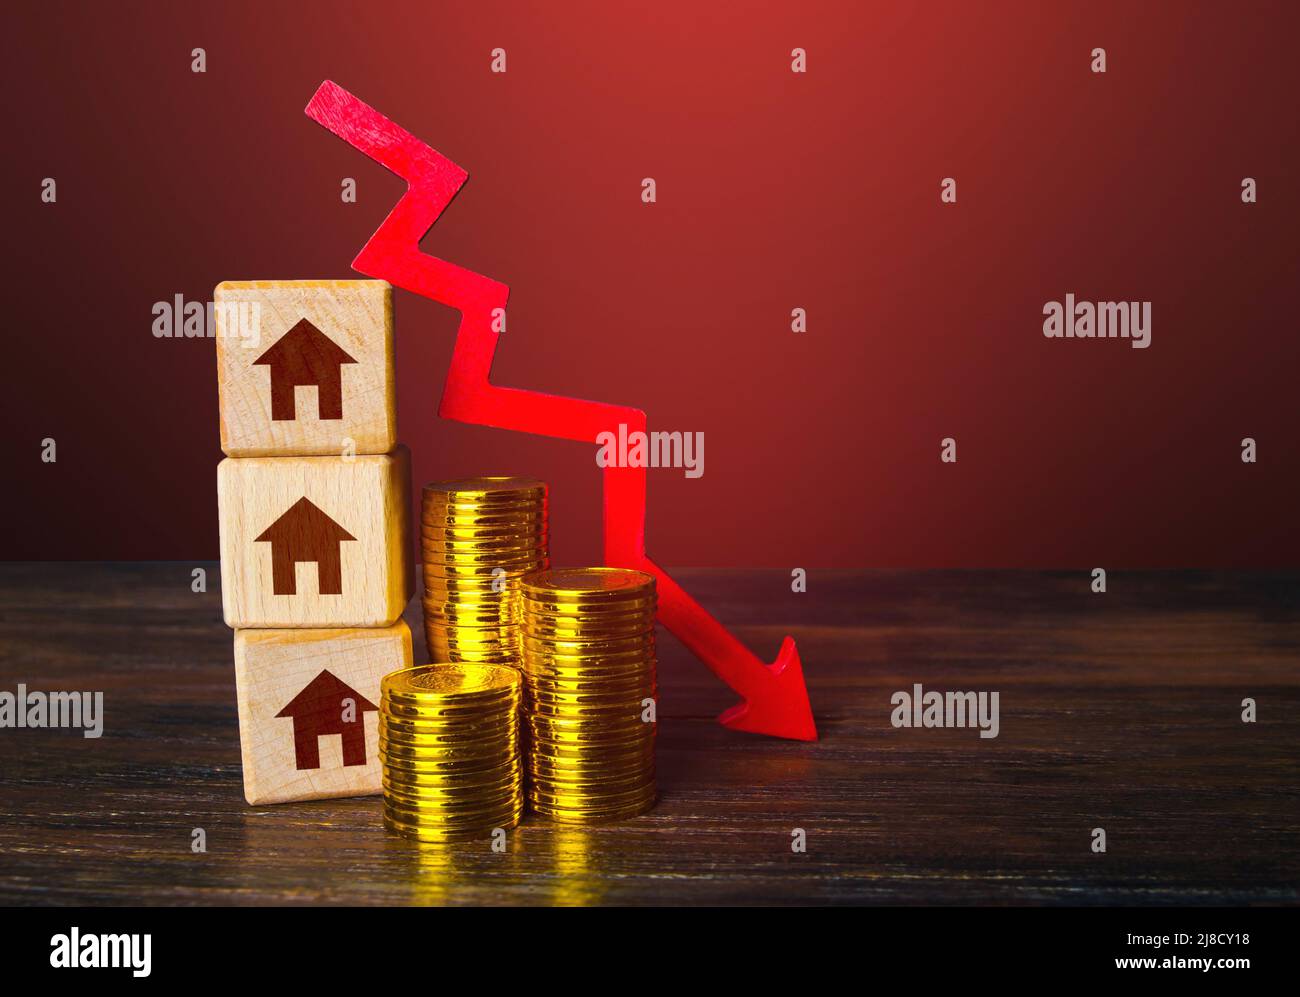 Real estate and red arrow down. Low housing prices. Reduced mortgage rates. Crisis. Maintenance cost. recession. Bankrupt and foreclose. Affordable ho Stock Photo